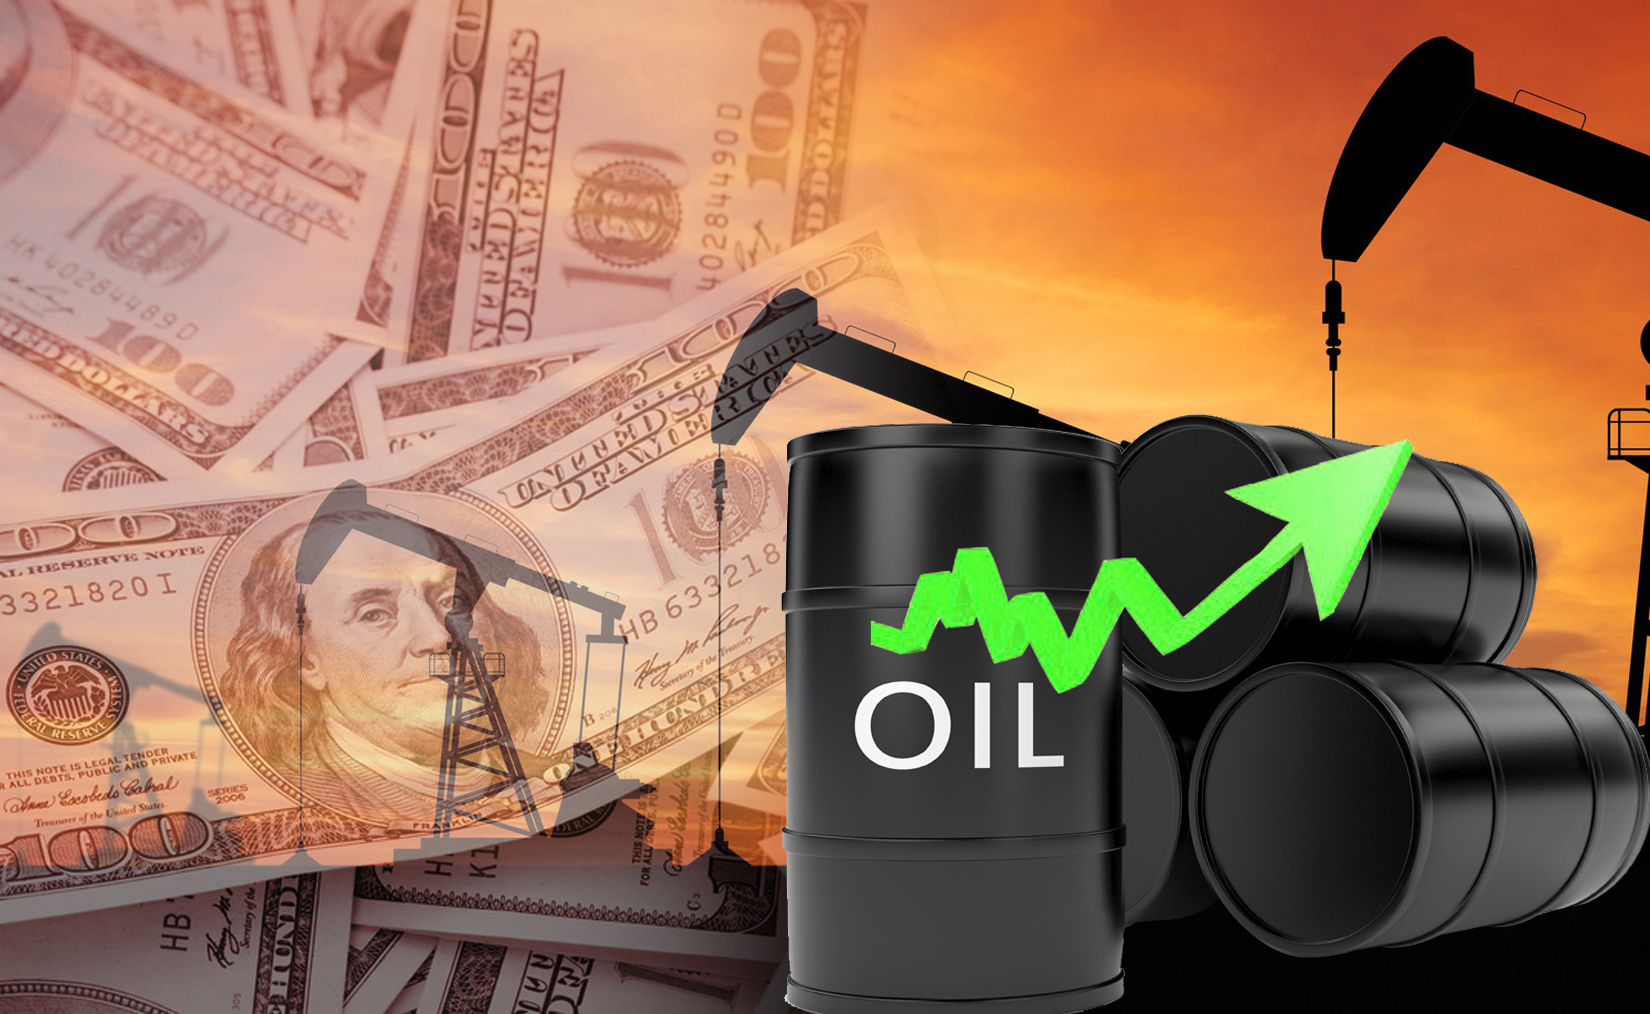 Kuwait oil price up 95 cents to USD 44.05 pb                                                                                                                                                                                                              